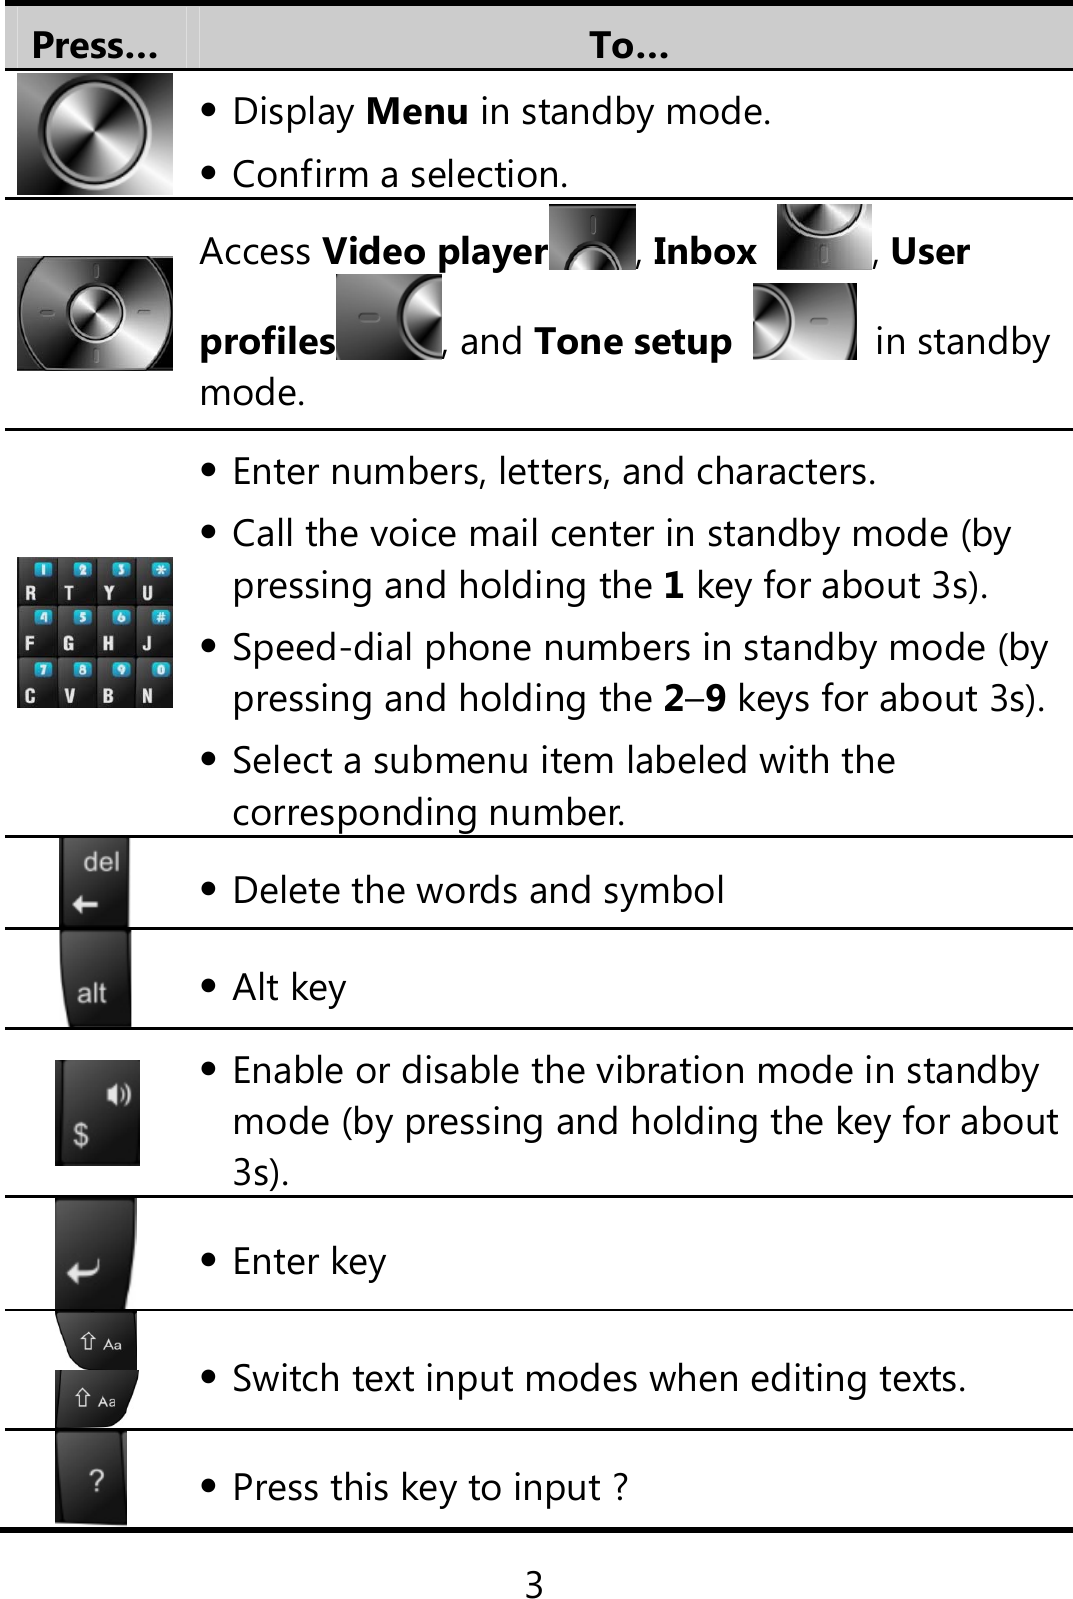 3 Press…  To…   Display Menu in standby mode.  Confirm a selection.  Access Video player , Inbox  , User profiles , and Tone setup  in standby mode.   Enter numbers, letters, and characters.  Call the voice mail center in standby mode (by pressing and holding the 1 key for about 3s).  Speed-dial phone numbers in standby mode (by pressing and holding the 2–9 keys for about 3s). Select a submenu item labeled with the corresponding number.  Delete the words and symbol     Alt key   Enable or disable the vibration mode in standby mode (by pressing and holding the key for about 3s).  Enter key   Switch text input modes when editing texts.   Press this key to input ? 